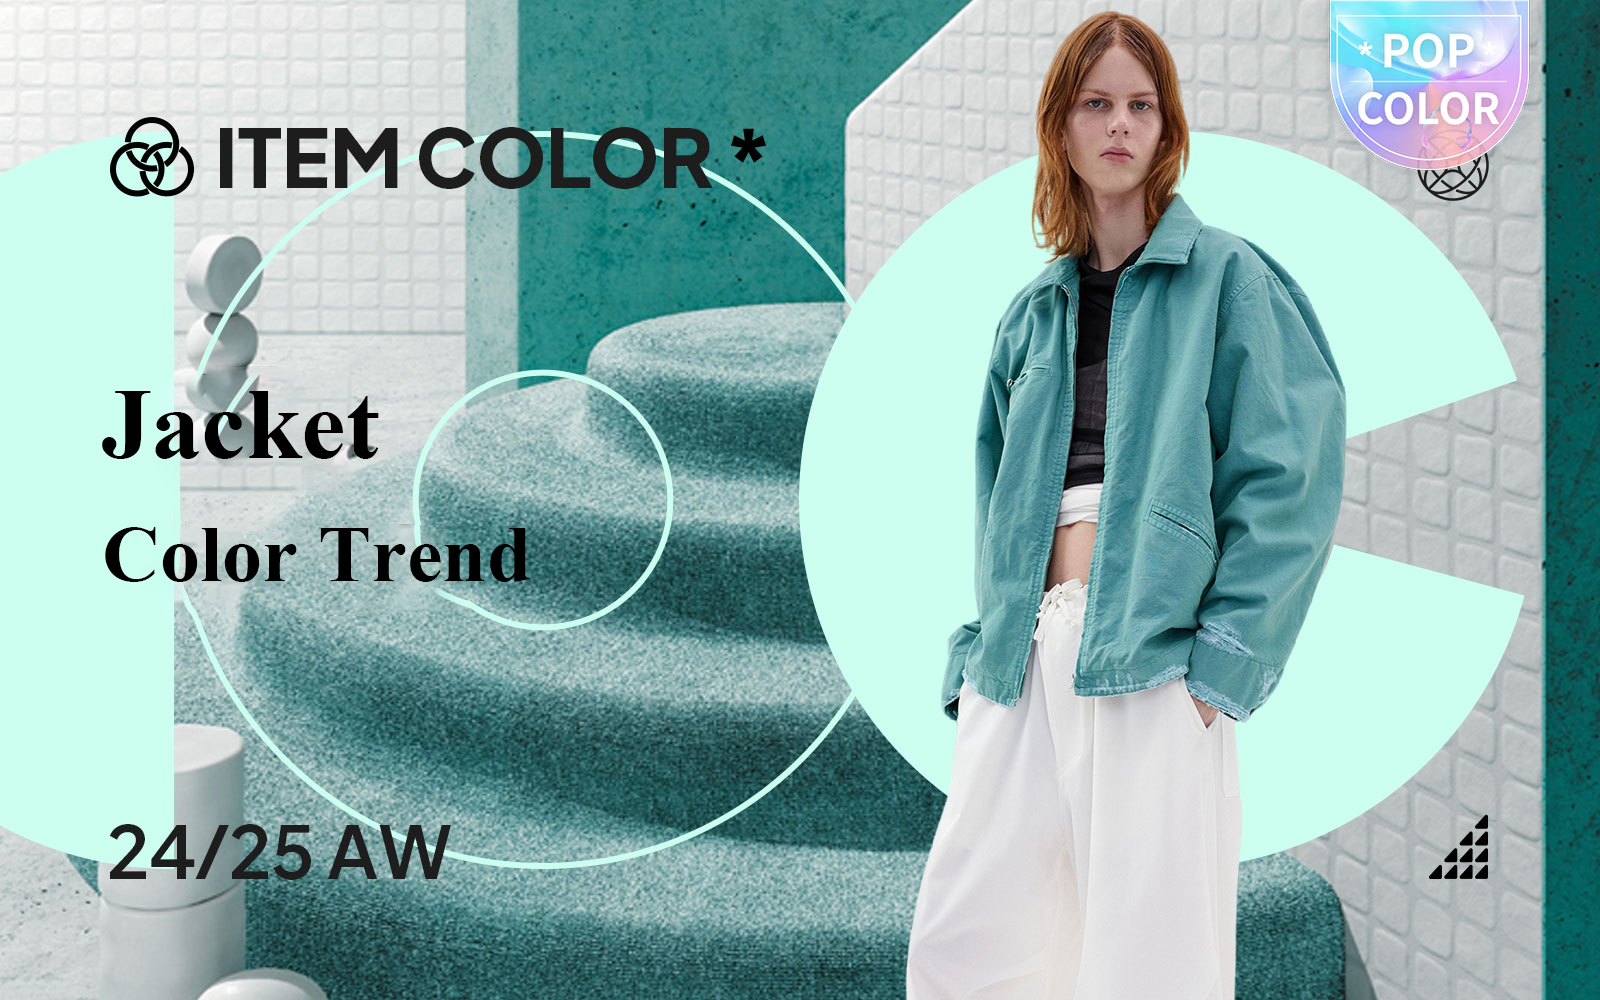 Revitalizing -- The Color Trend for Women's Jacket